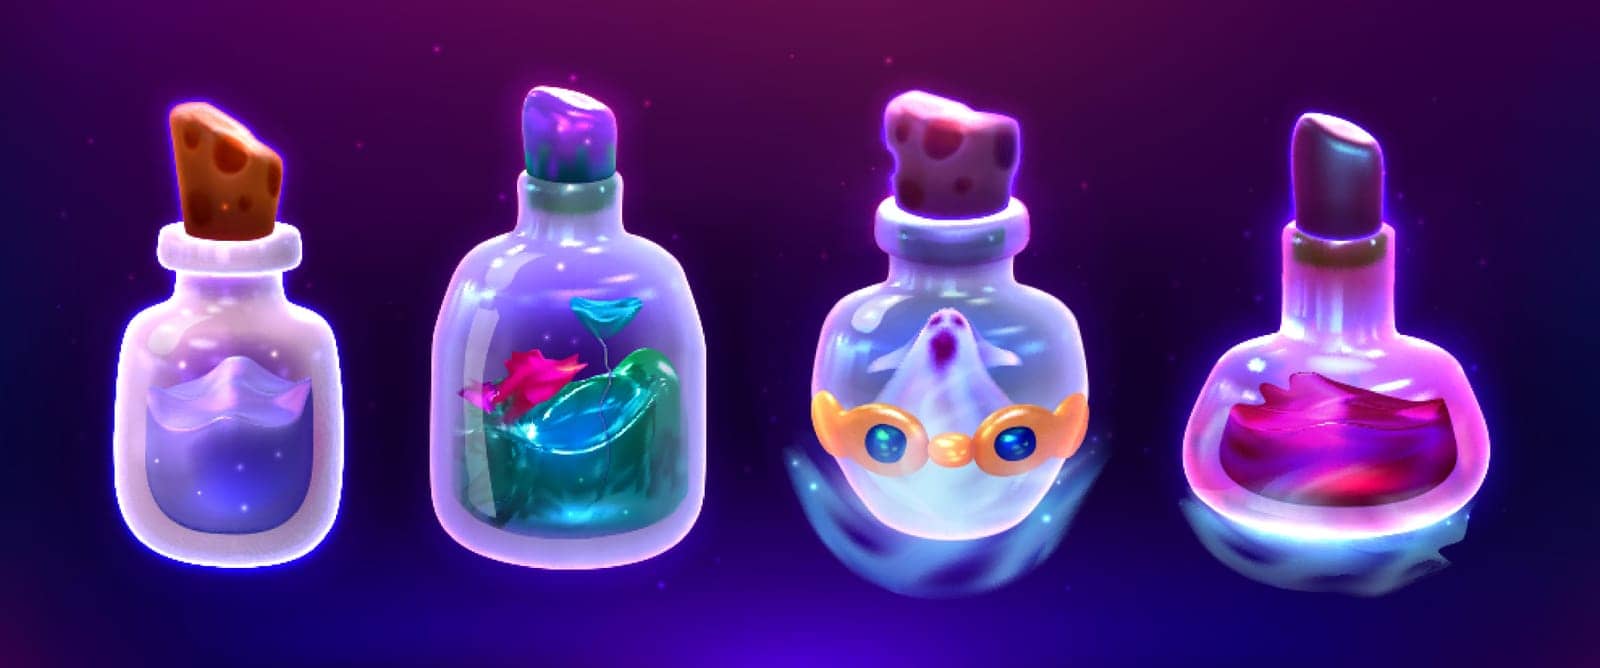 Cartoon game magic potions in glass bottles with corks by Redgreystock